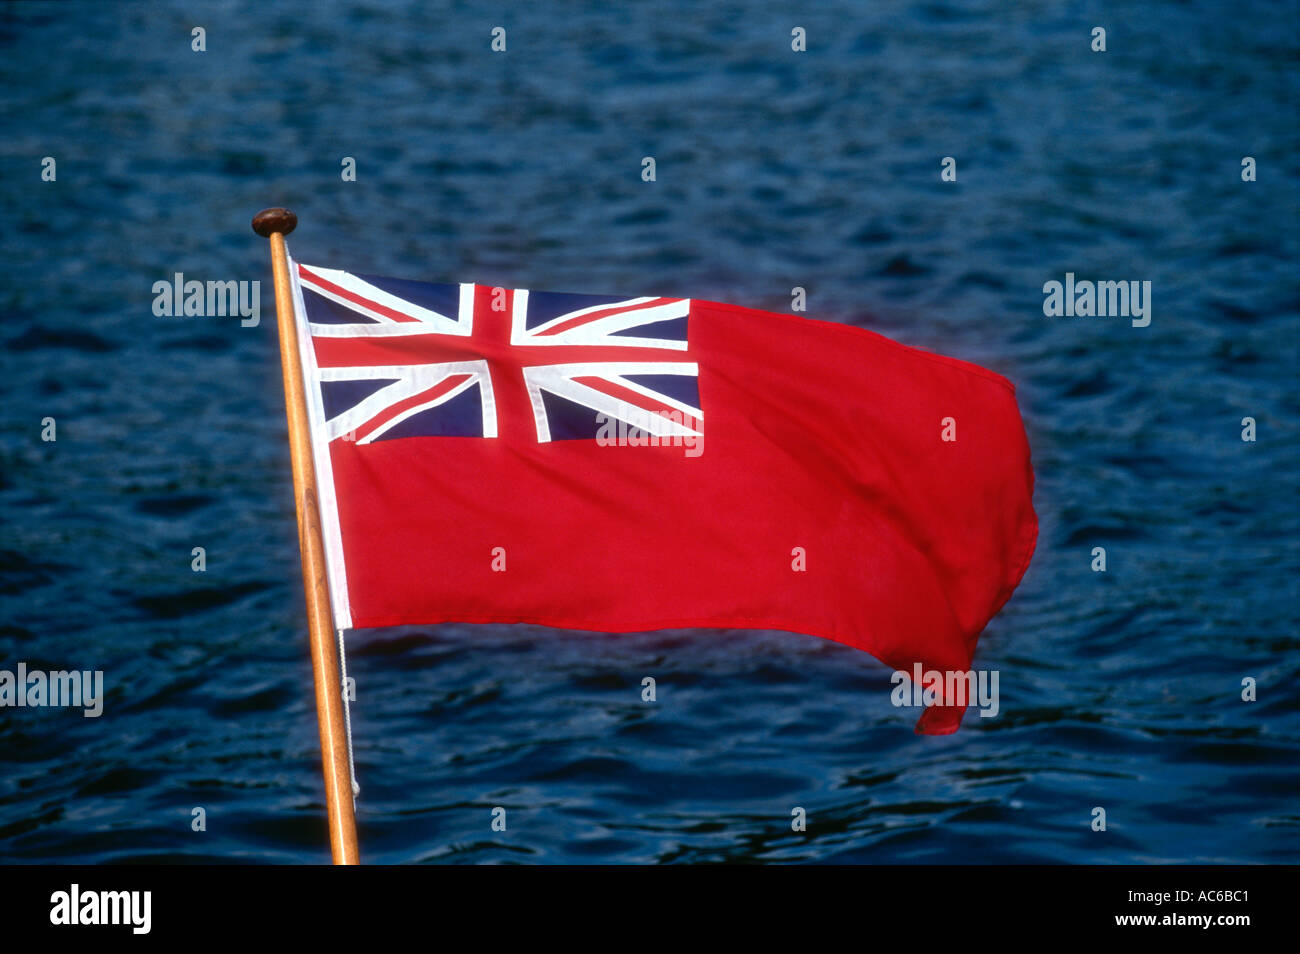 The Red Ensign flies at the stern ofg a pleasure launch on the River Thames at Henley in Oxfordshire England UK Stock Photo